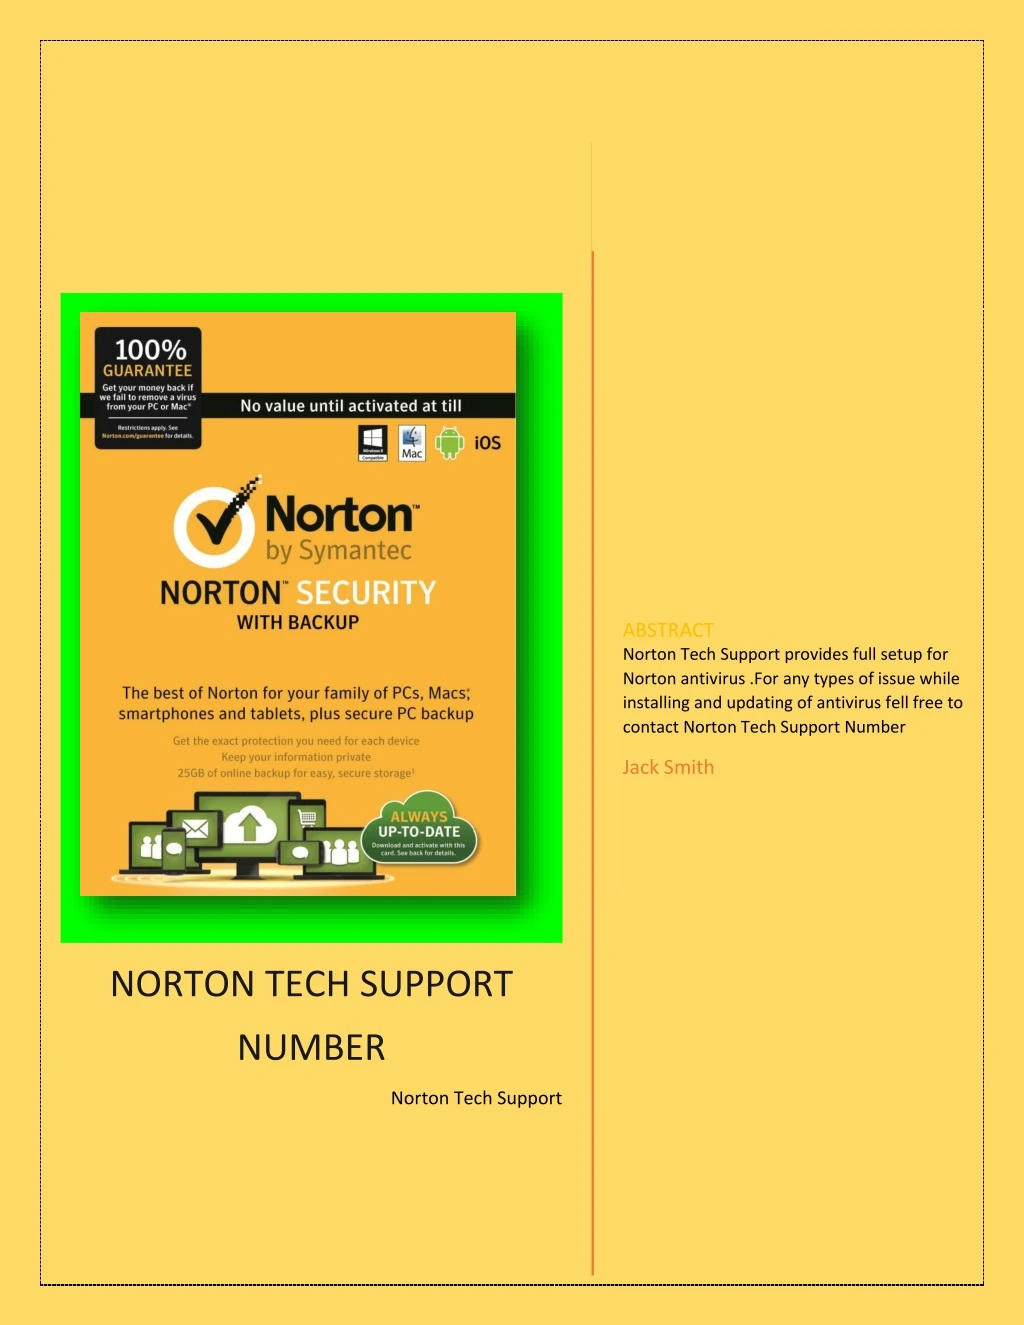 abstract norton tech support provides full setup